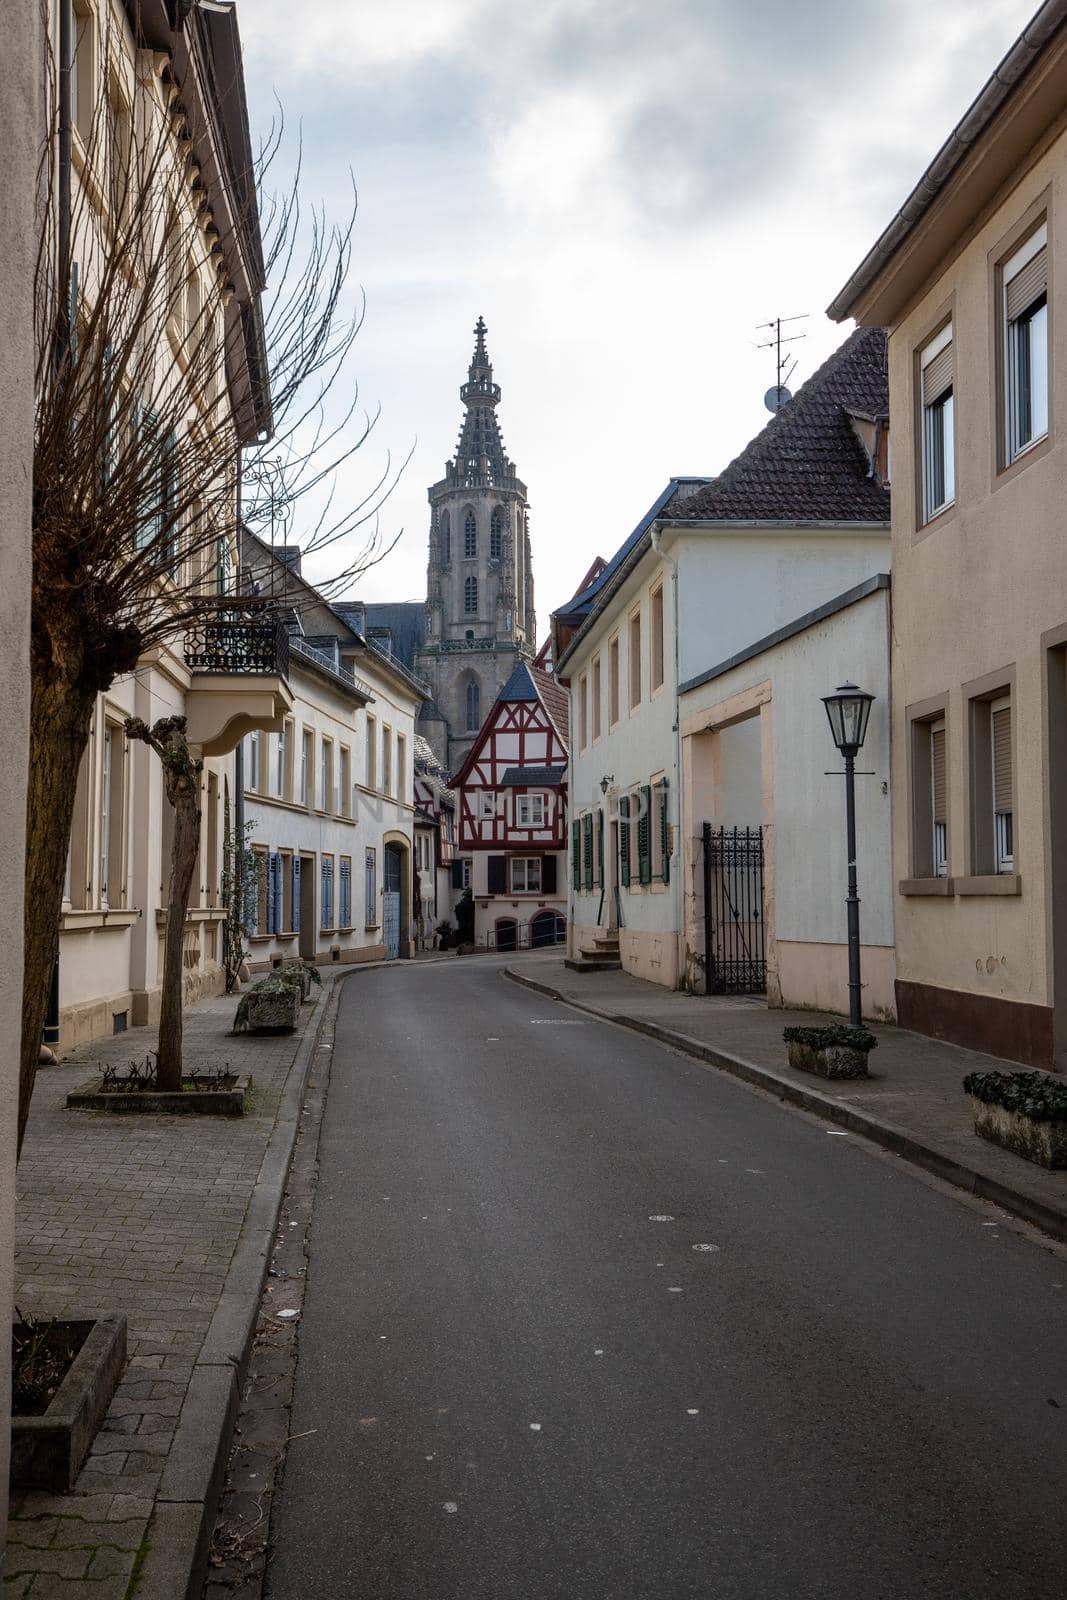 Cobbled road with historic houses and Schlosskirche in Meisenheim, Rhineland-Palatinate, Germany 